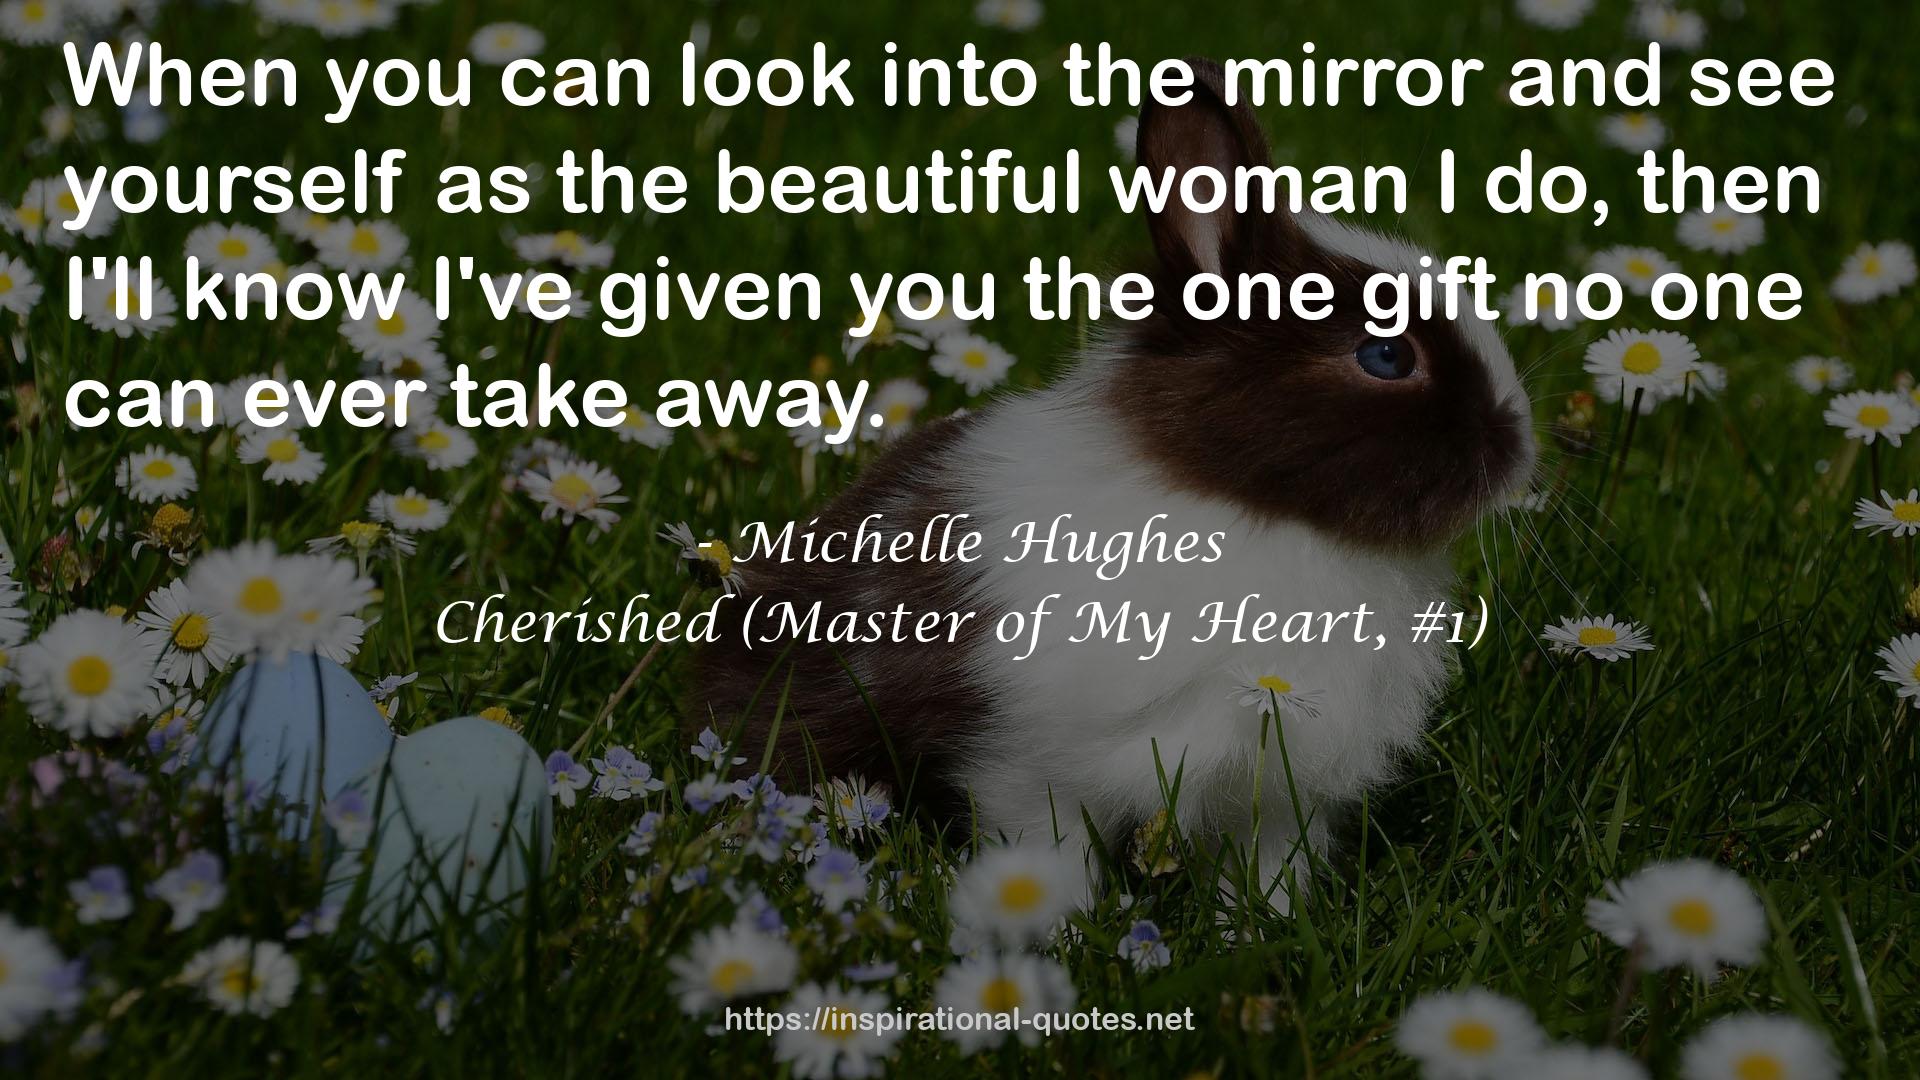 Cherished (Master of My Heart, #1) QUOTES